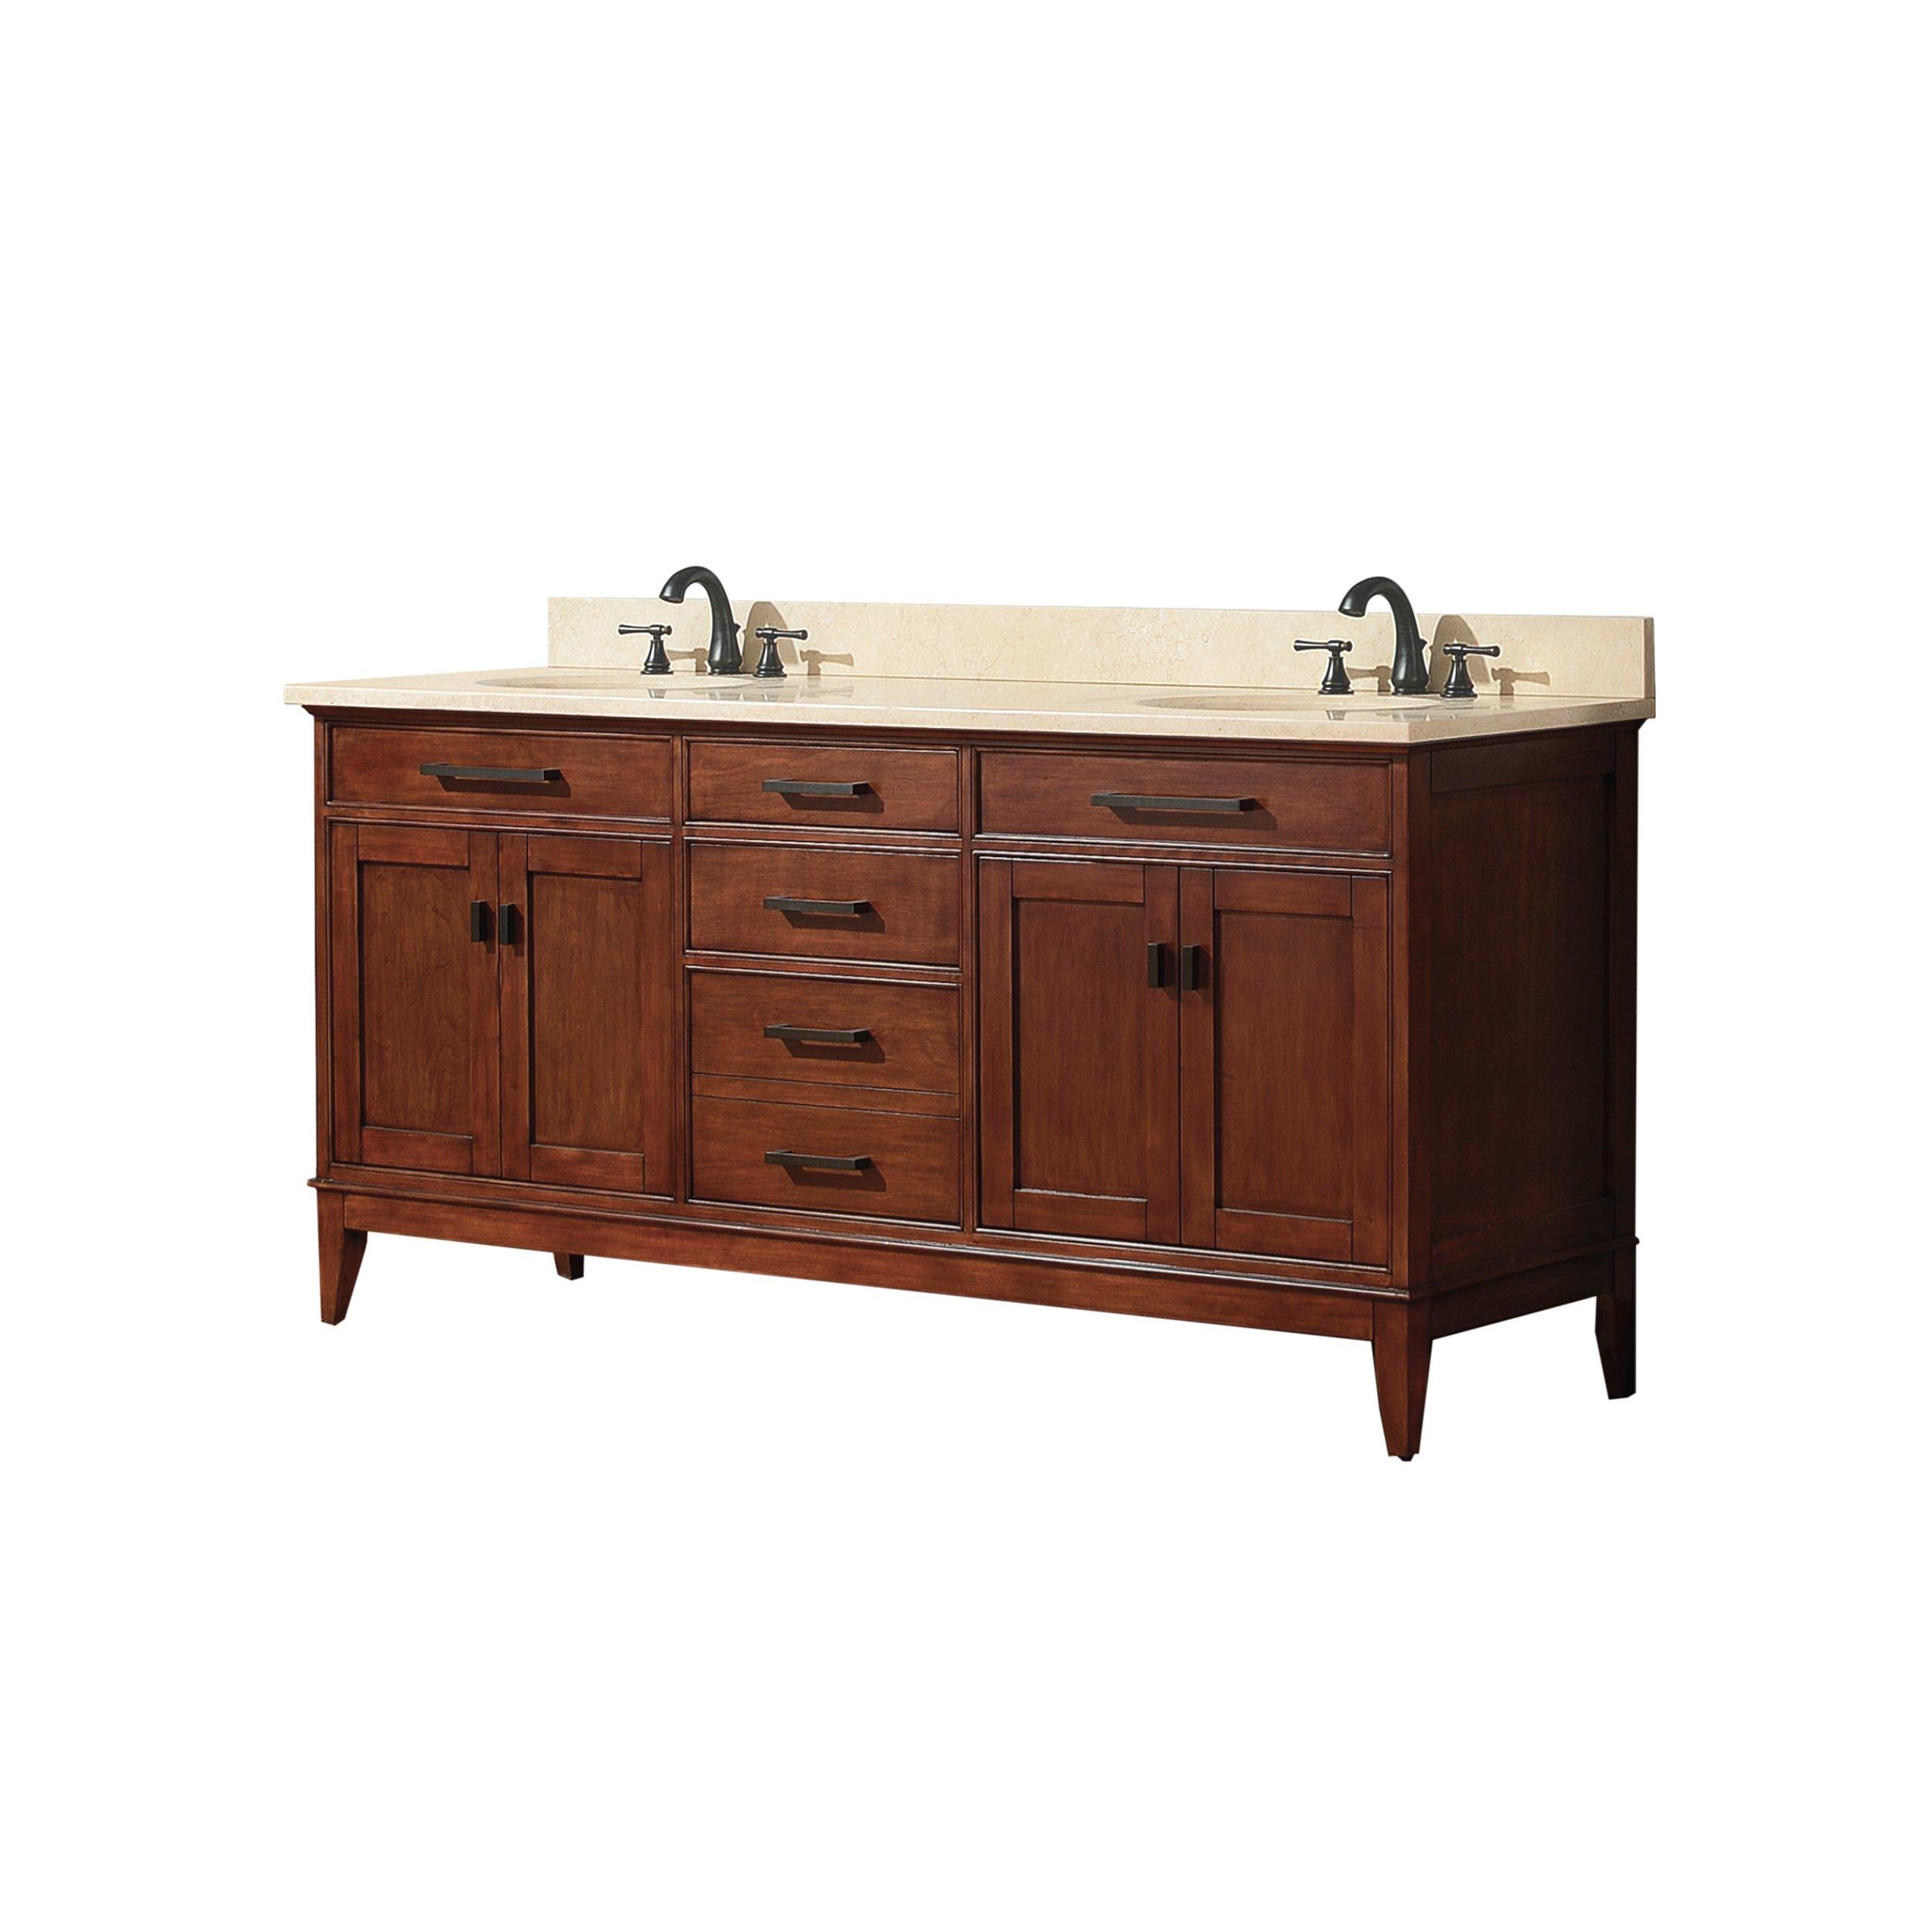 Landon 73 in. Tobacco Double Vanity with Crema Marfil Top